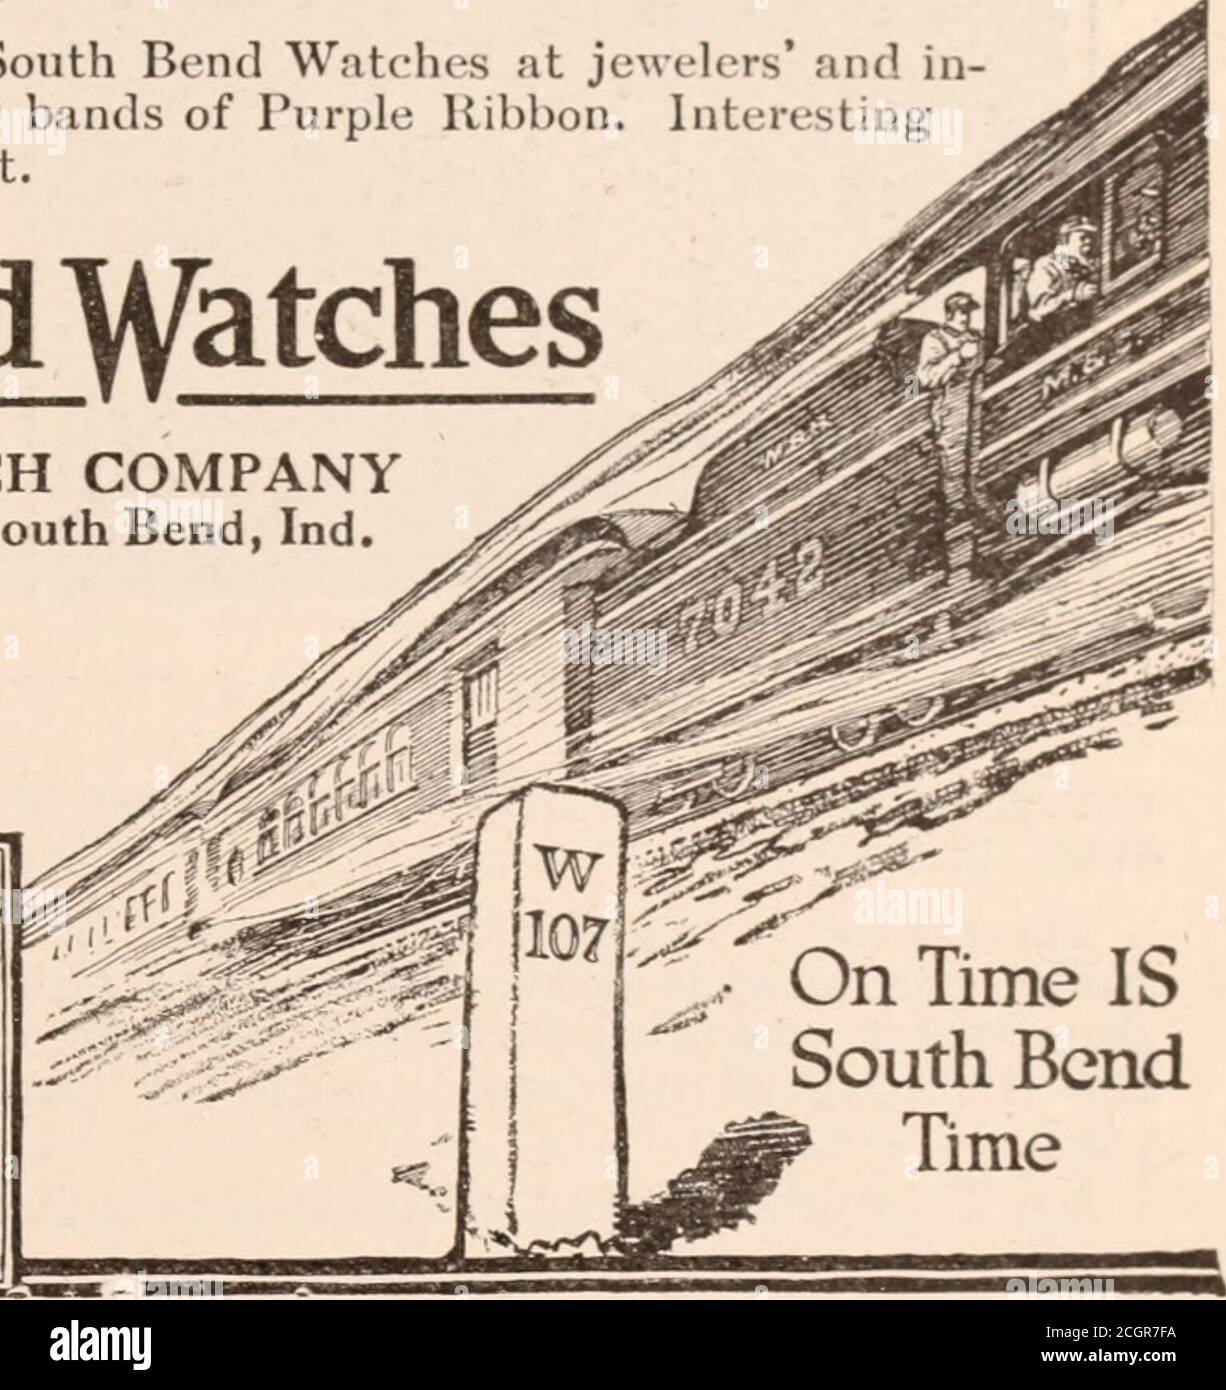 . Baltimore and Ohio employees magazine . South Rend Watches SOUTH BEND WATCH COMPANY 1812 Studebaker Street. South Bend. Ind. Vie South BendSTUDEBAKERRailroad Uatc/i §j MOVEMENTS ONLY16Size—17J.—5 pos. J28. 21 30.00 21 40.00 18 Size—) 7 24.00 21 28.00 Fitted to your oivii caseif desired. Effective Xovember 1 C. W. Mclntyre wasai)pointed yardmaster at Canton, vice E. W.Beattie, assigned to other duties. His juris-diction will cover the territory from NorthIndustry to Aultman, inclusive. Effective October 27 L. T. Campbell wasappointed agent at Canton, vice W. F. Henry,resigned. J. C. Fluck has Stock Photo